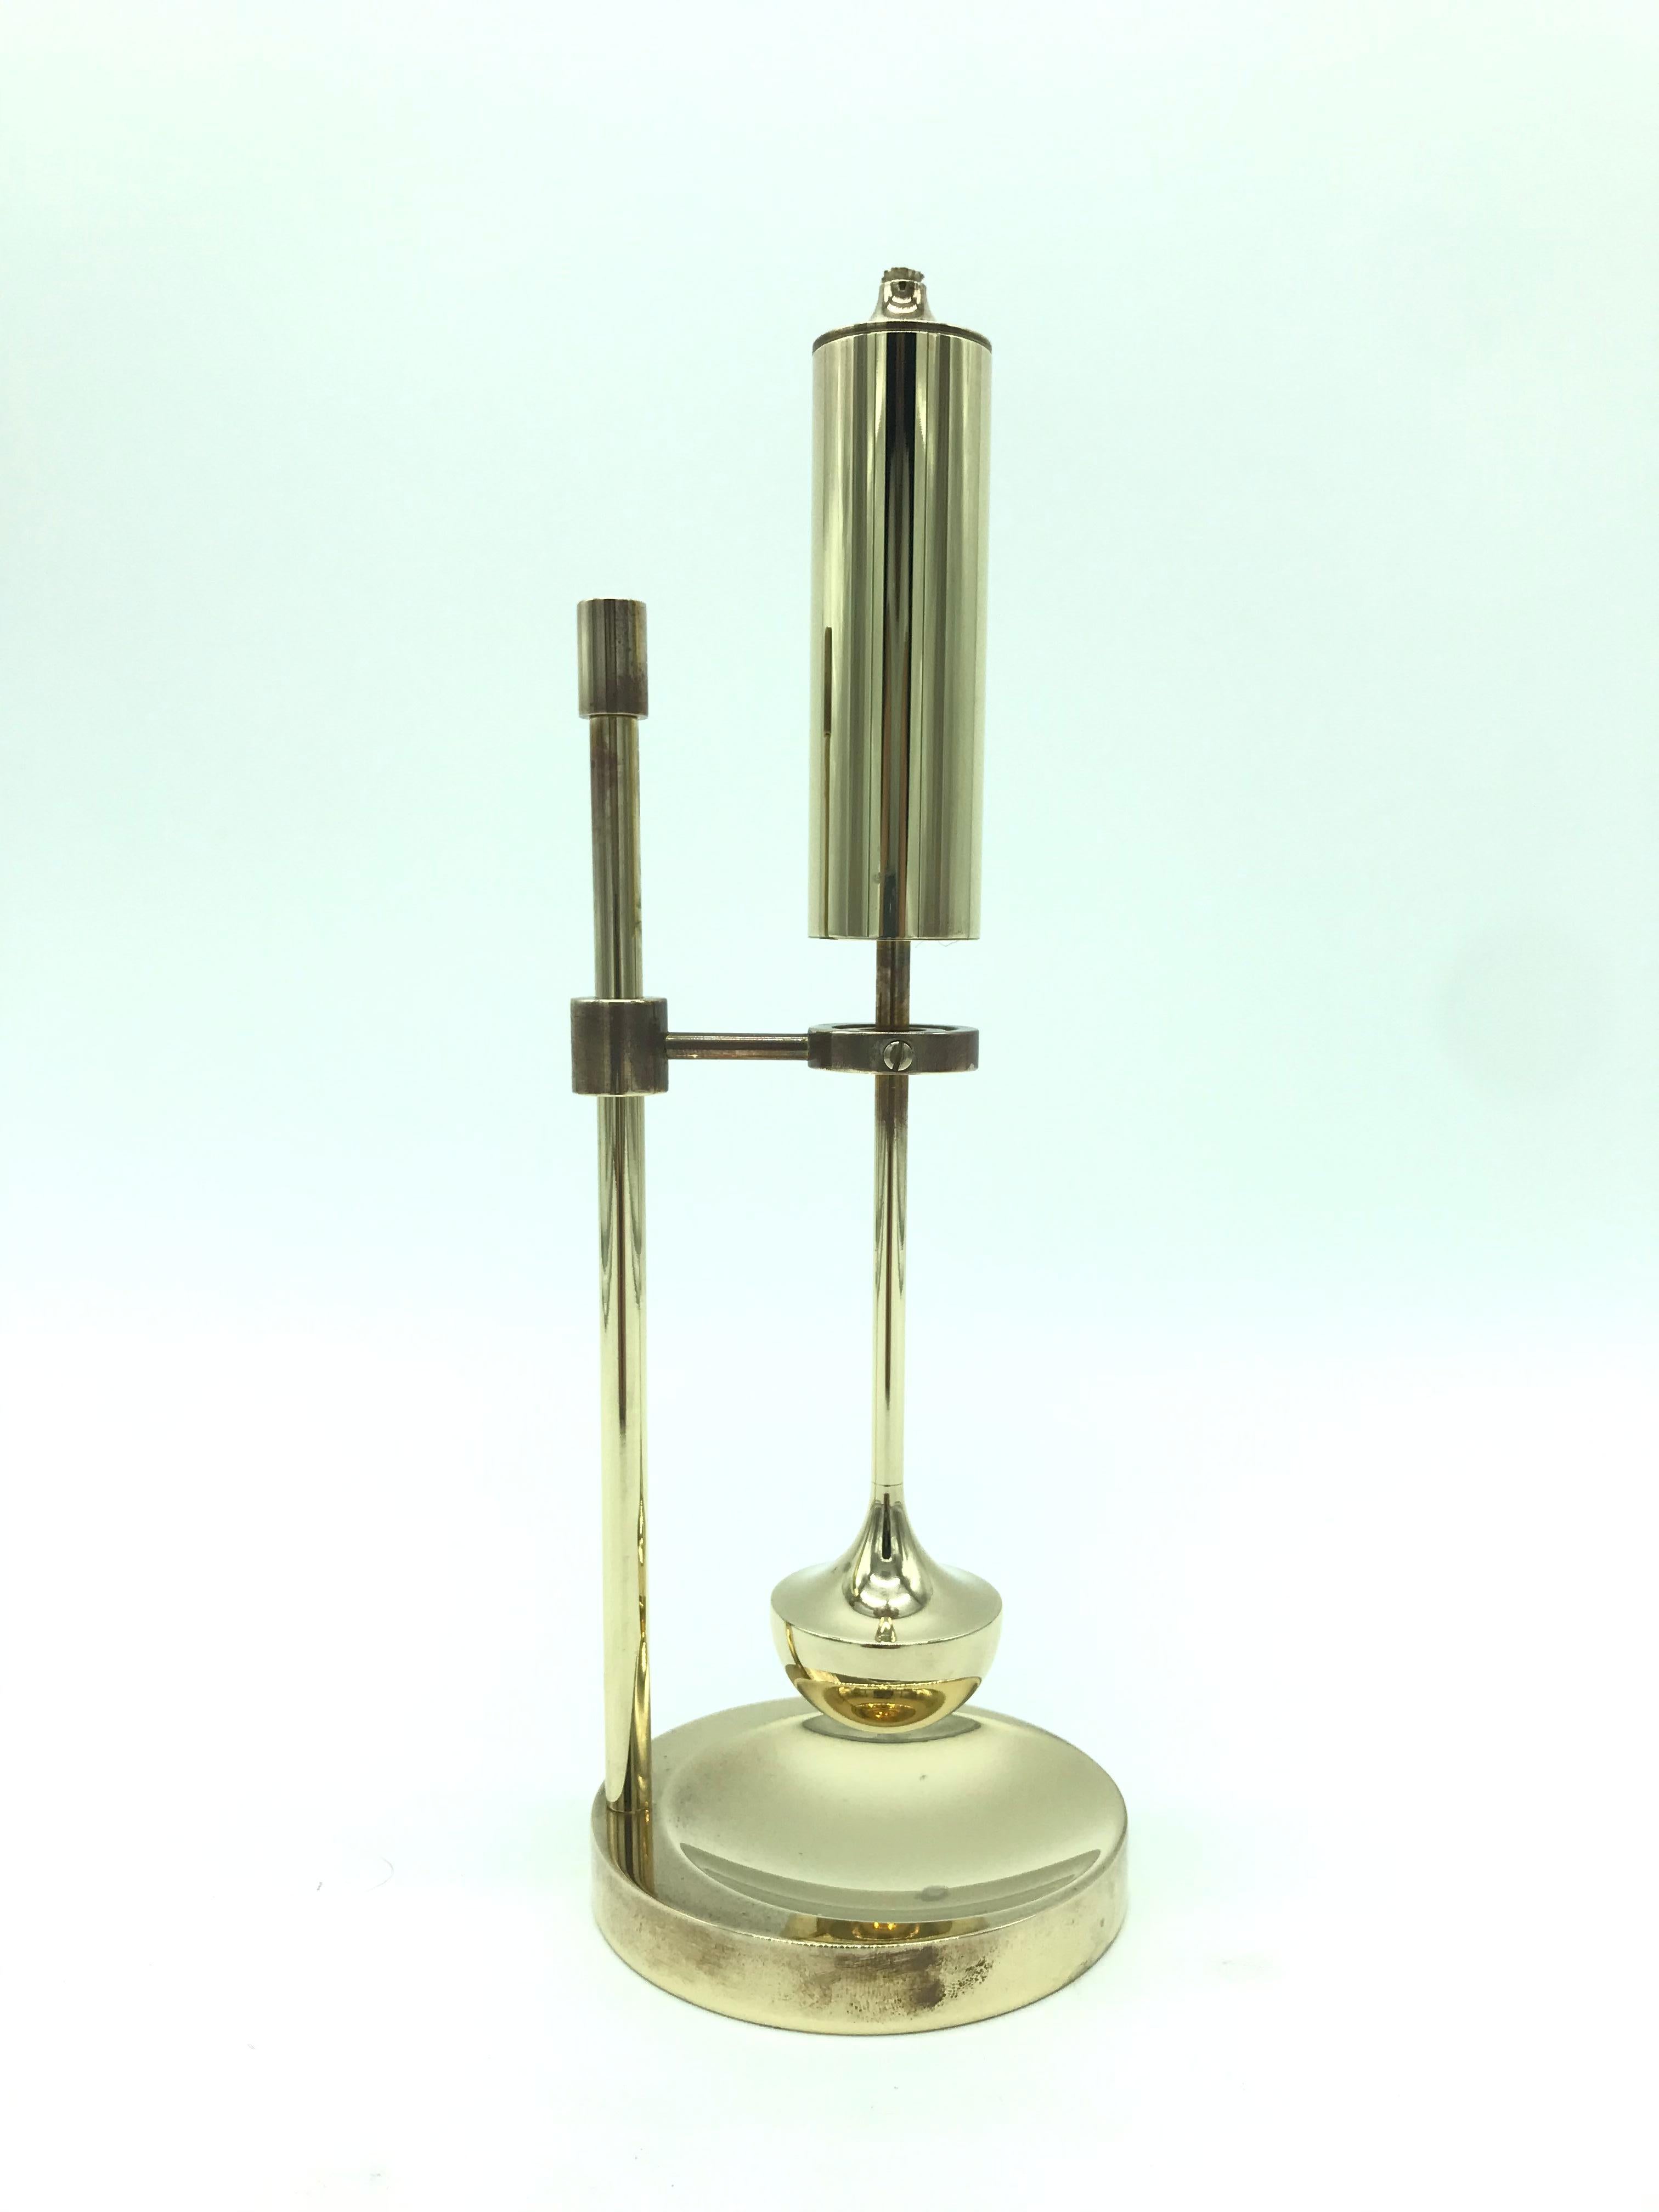 Vintage midcentury oil lamp by Ilse Ammonsen for Daproma,
Solid brass.
An extra wick will be included.
Runs on normal lamp oil. 



  